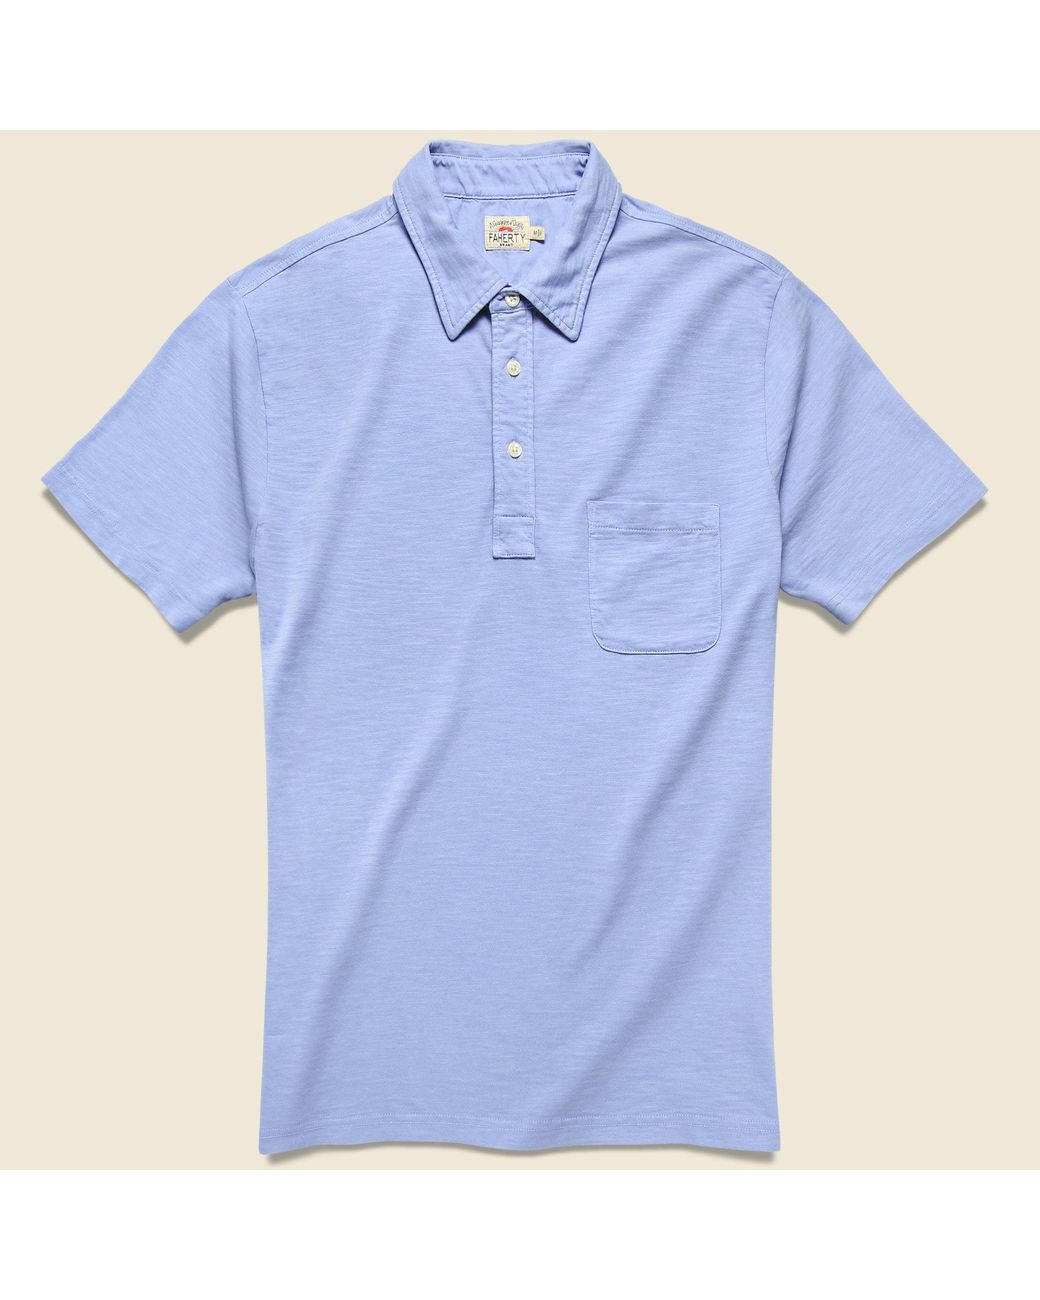 Faherty Brand Cotton Garment Dyed Polo - Lilac in Purple for Men - Lyst